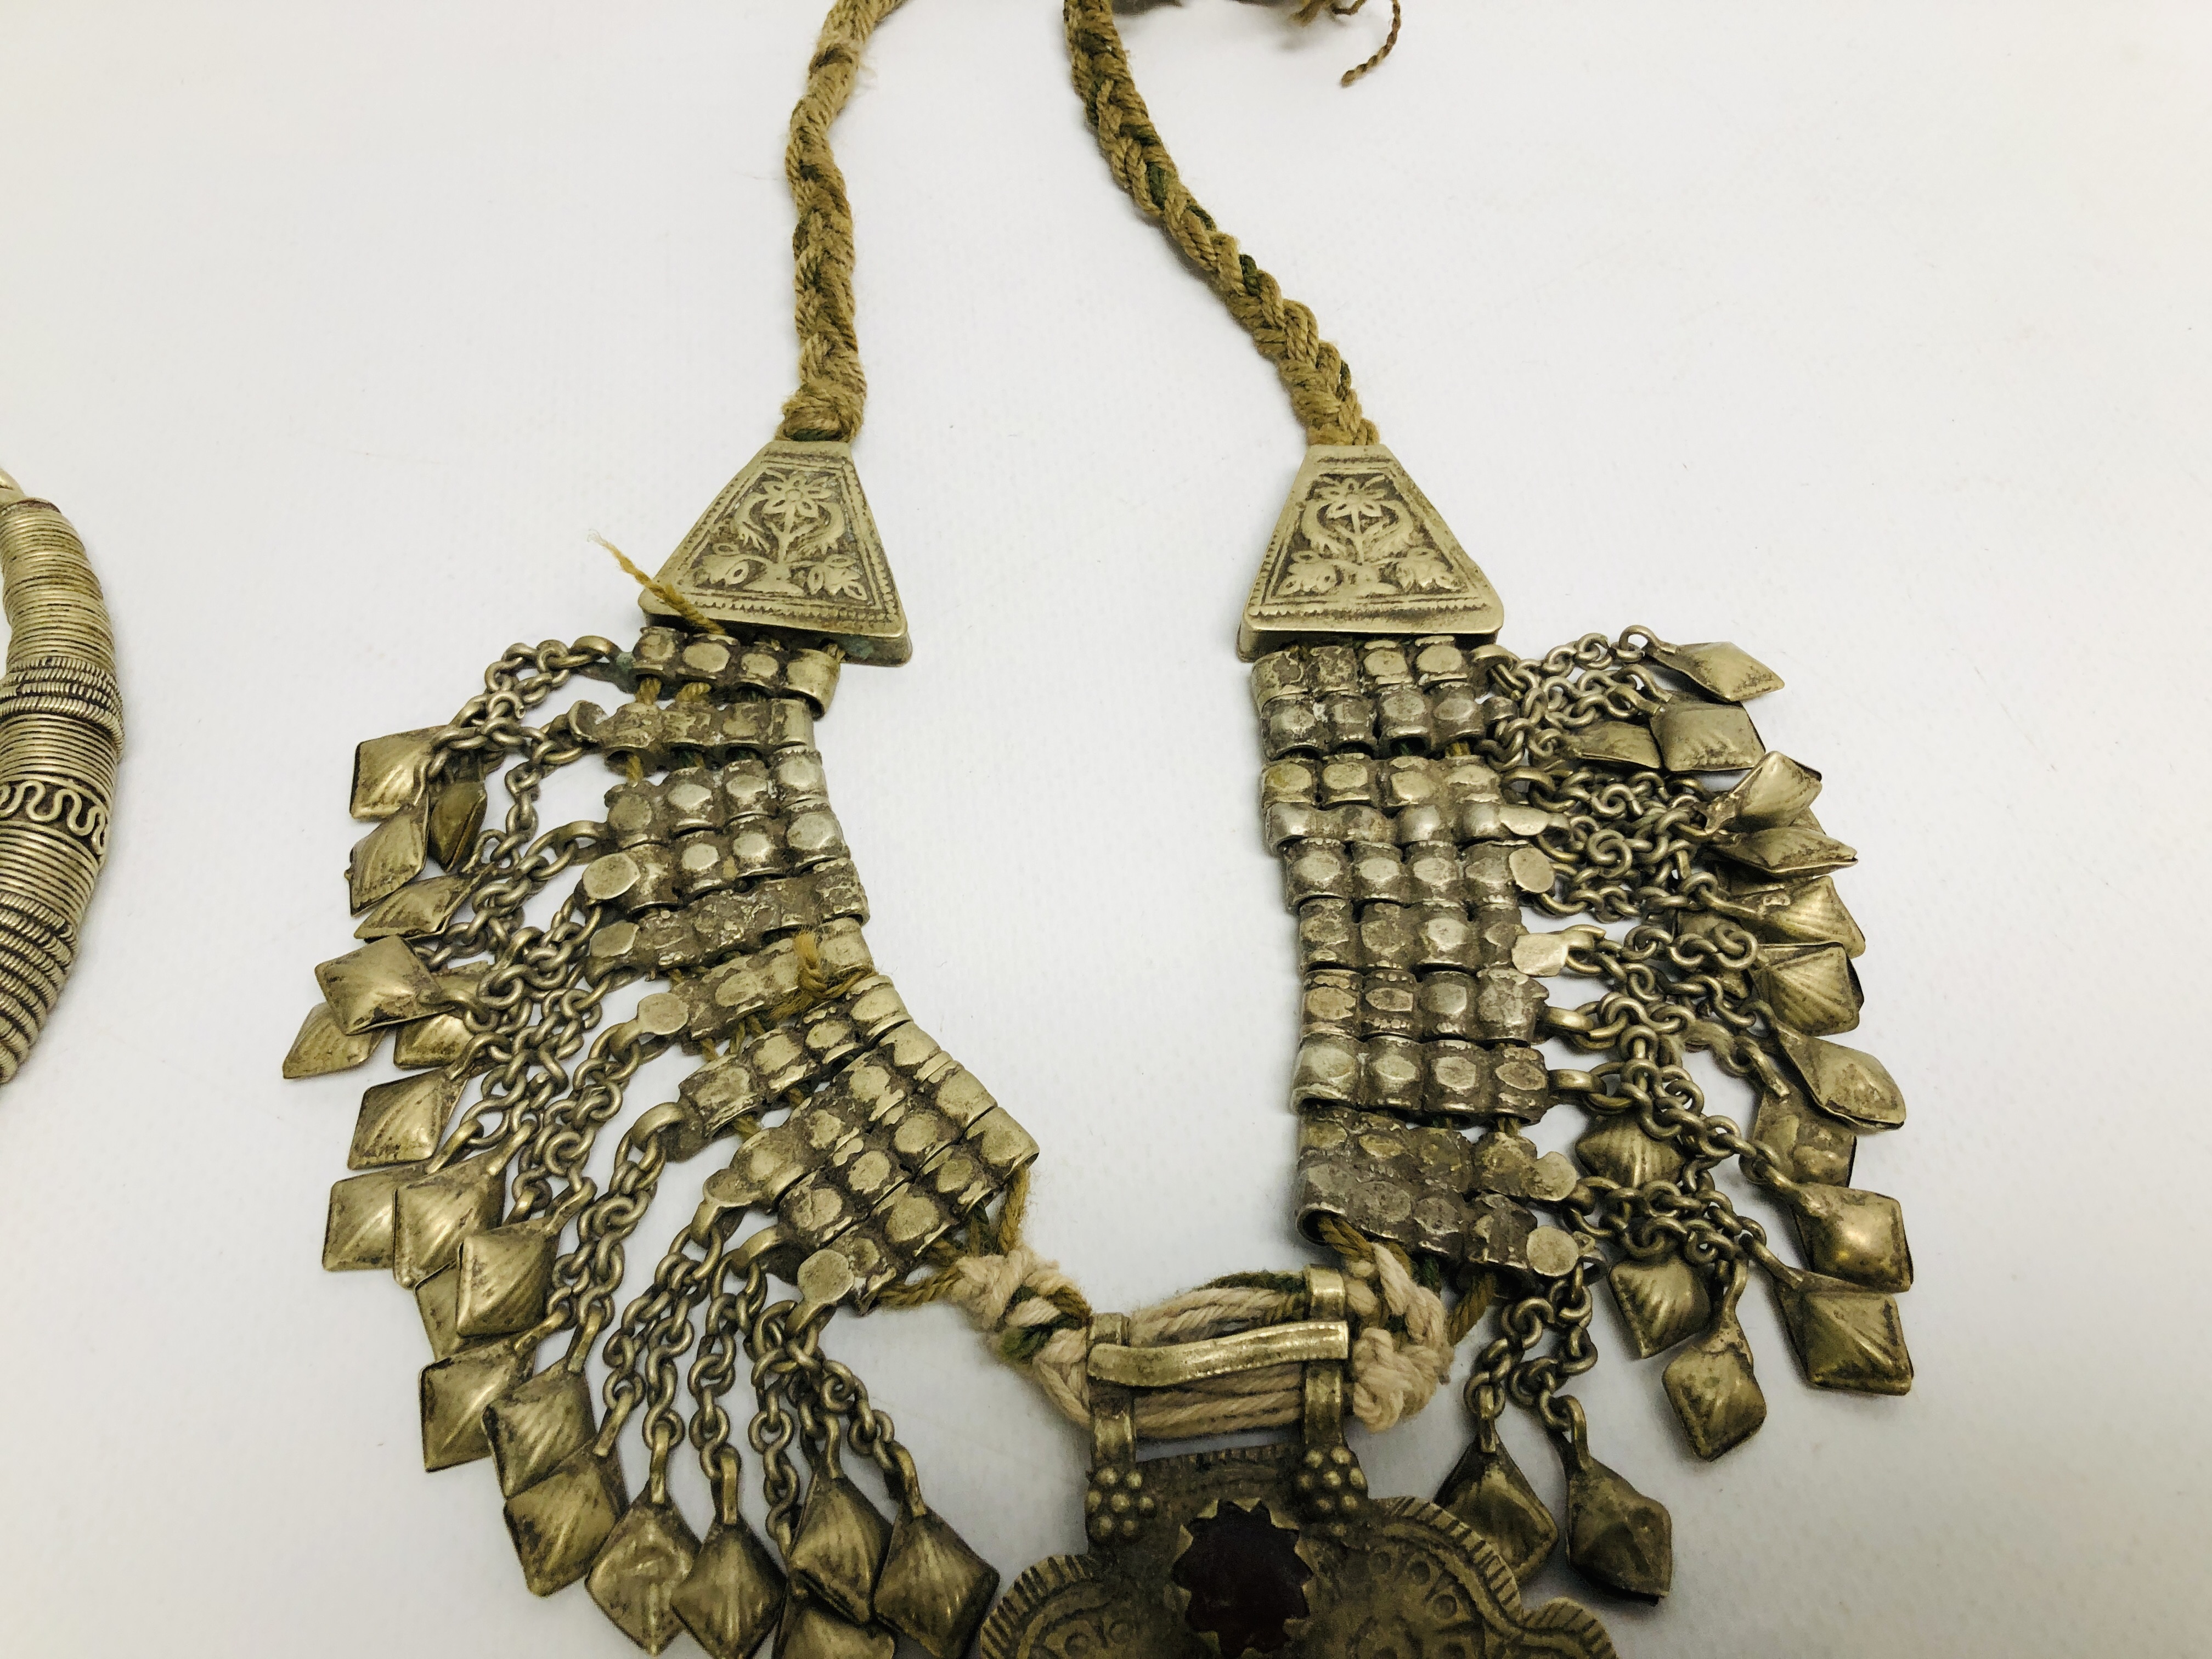 A GROUP OF 5 ELABORATE EASTERN STYLE WHITE METAL NECKLACES TO INCLUDE CHOKER EXAMPLES. - Image 6 of 8